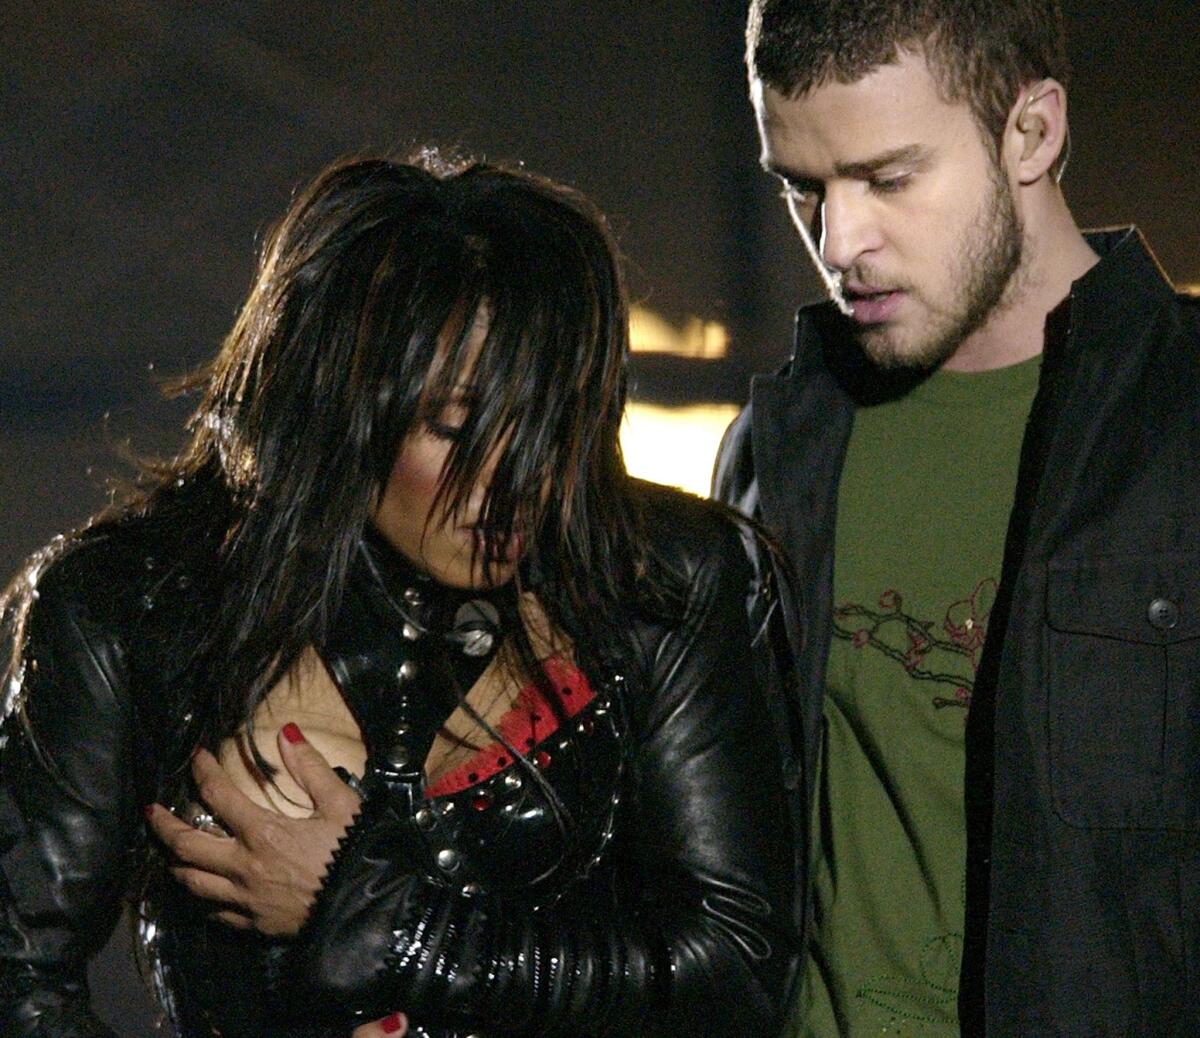 Janet Jackson and Justin Timberlake at 2004's infamous Super Bowl halftime performance.